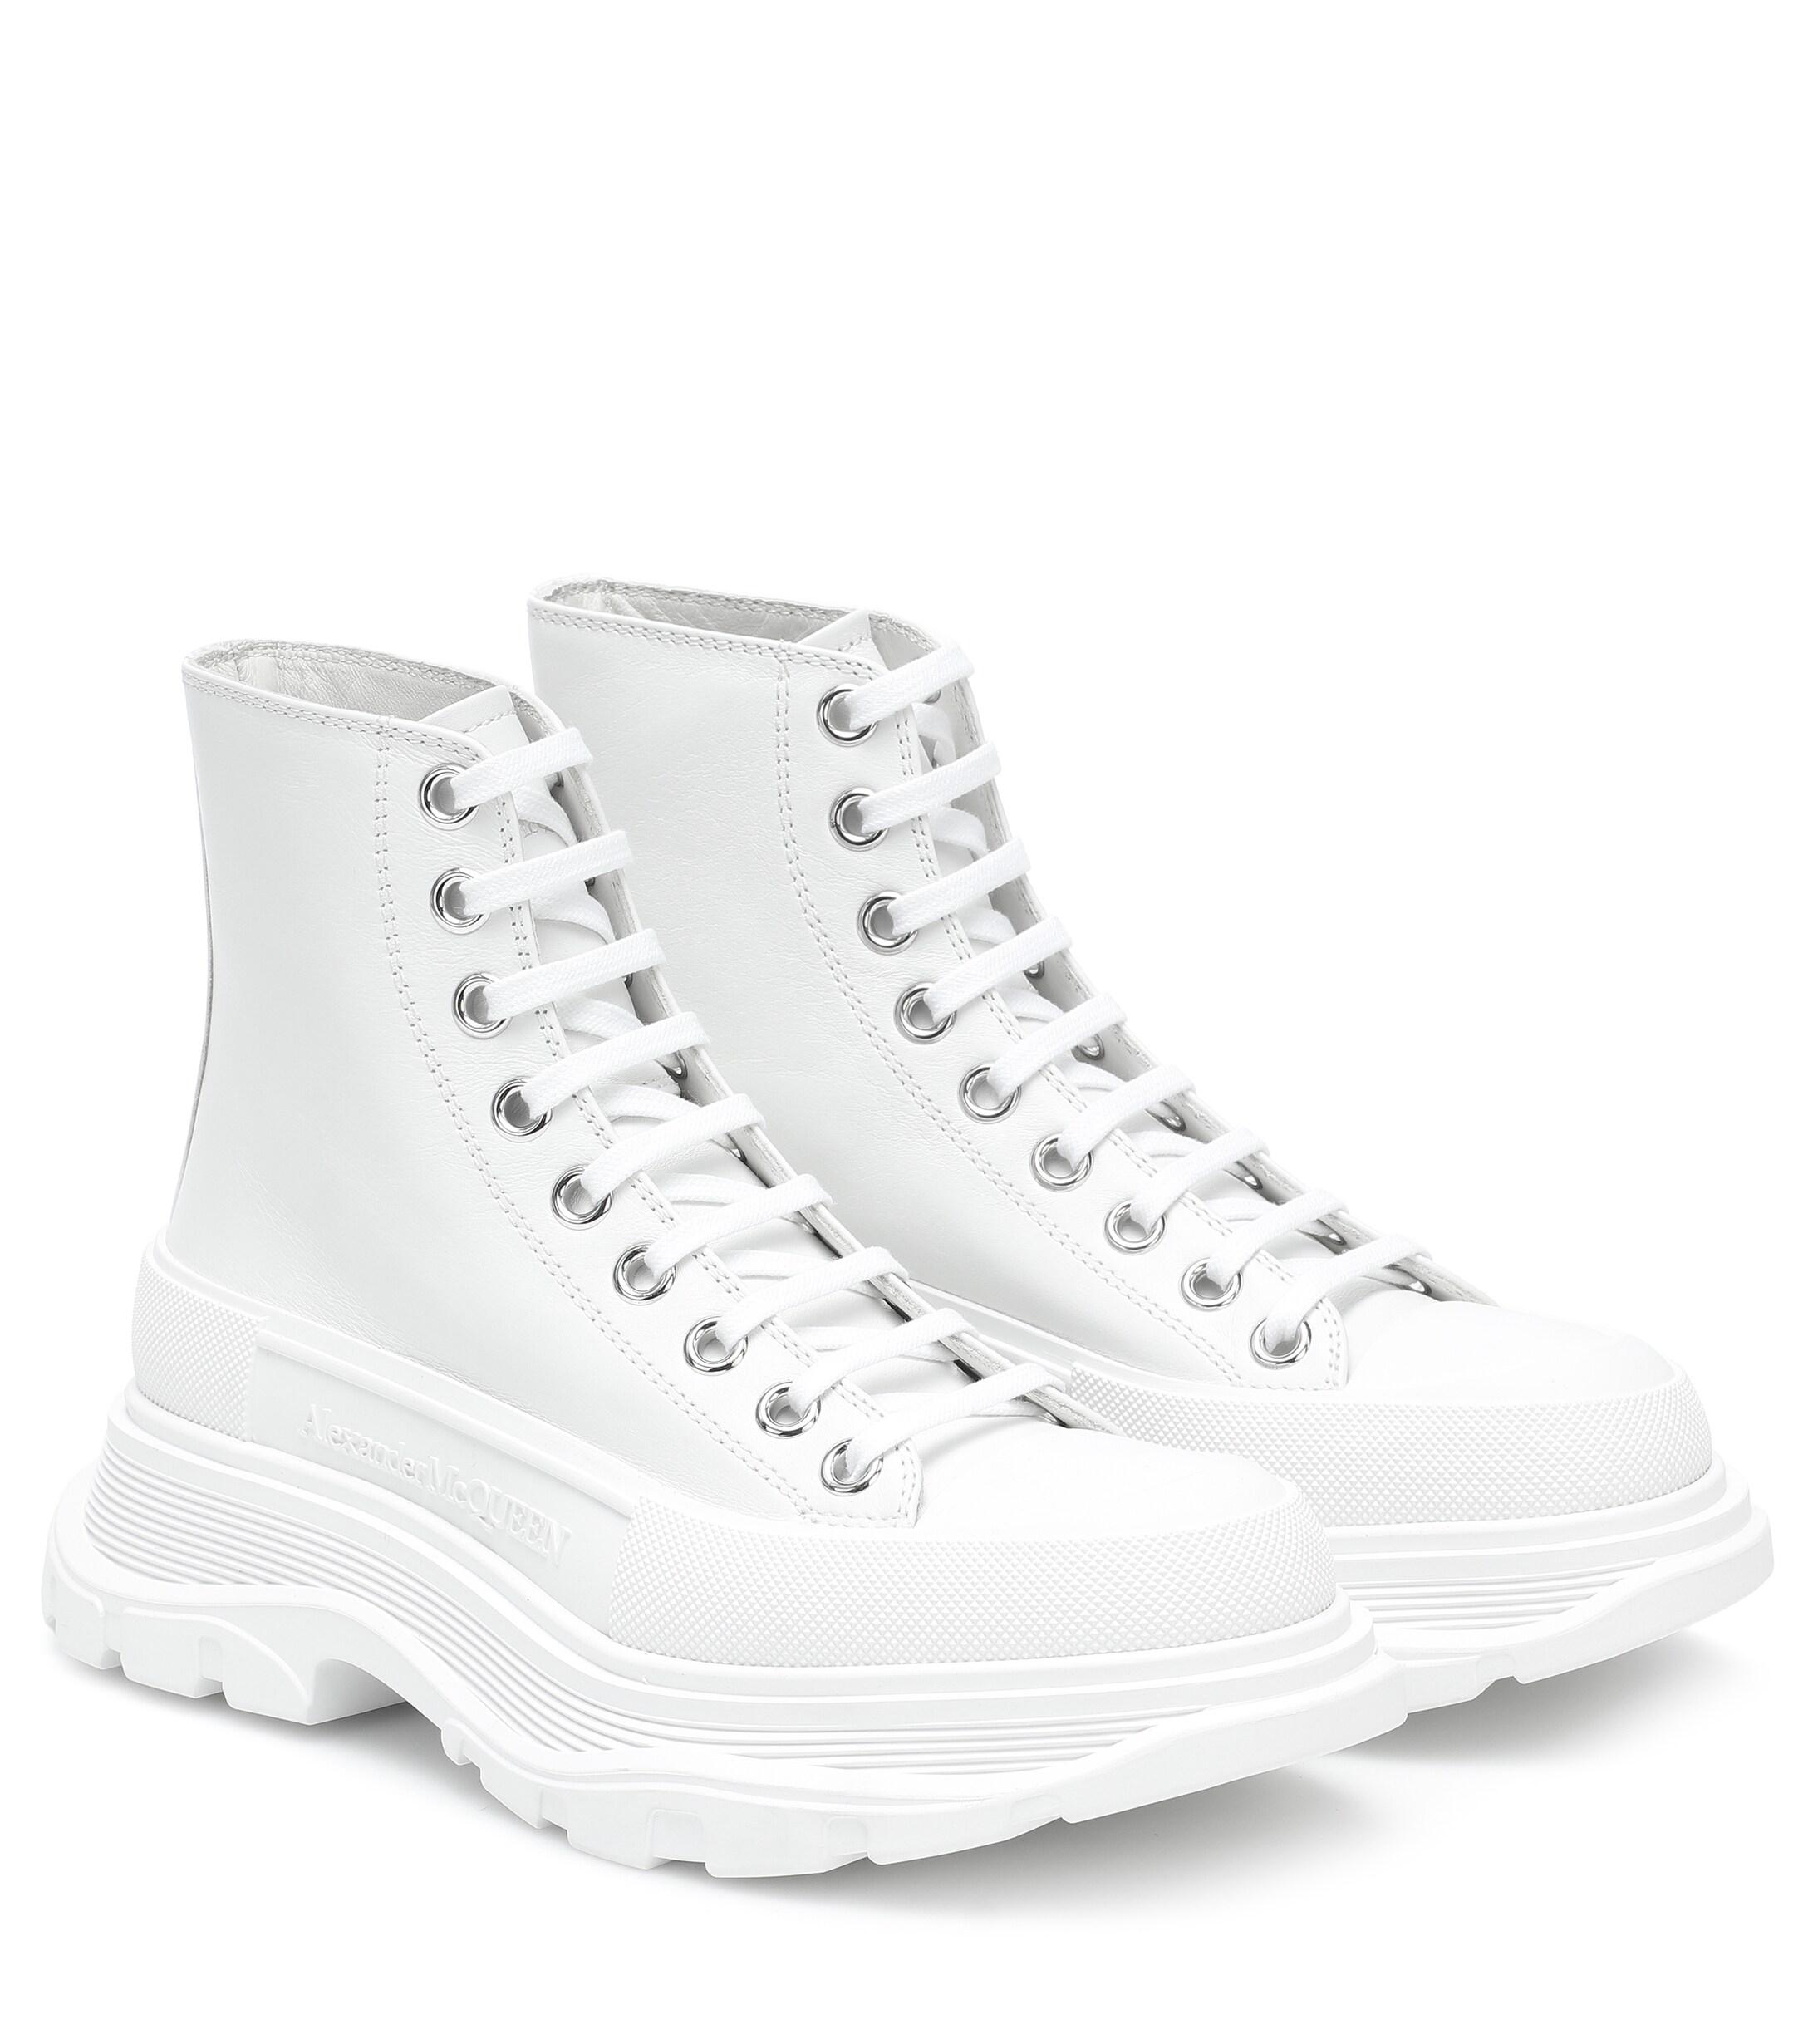 Alexander McQueen Tread Slick Leather Ankle Boots in White - Lyst